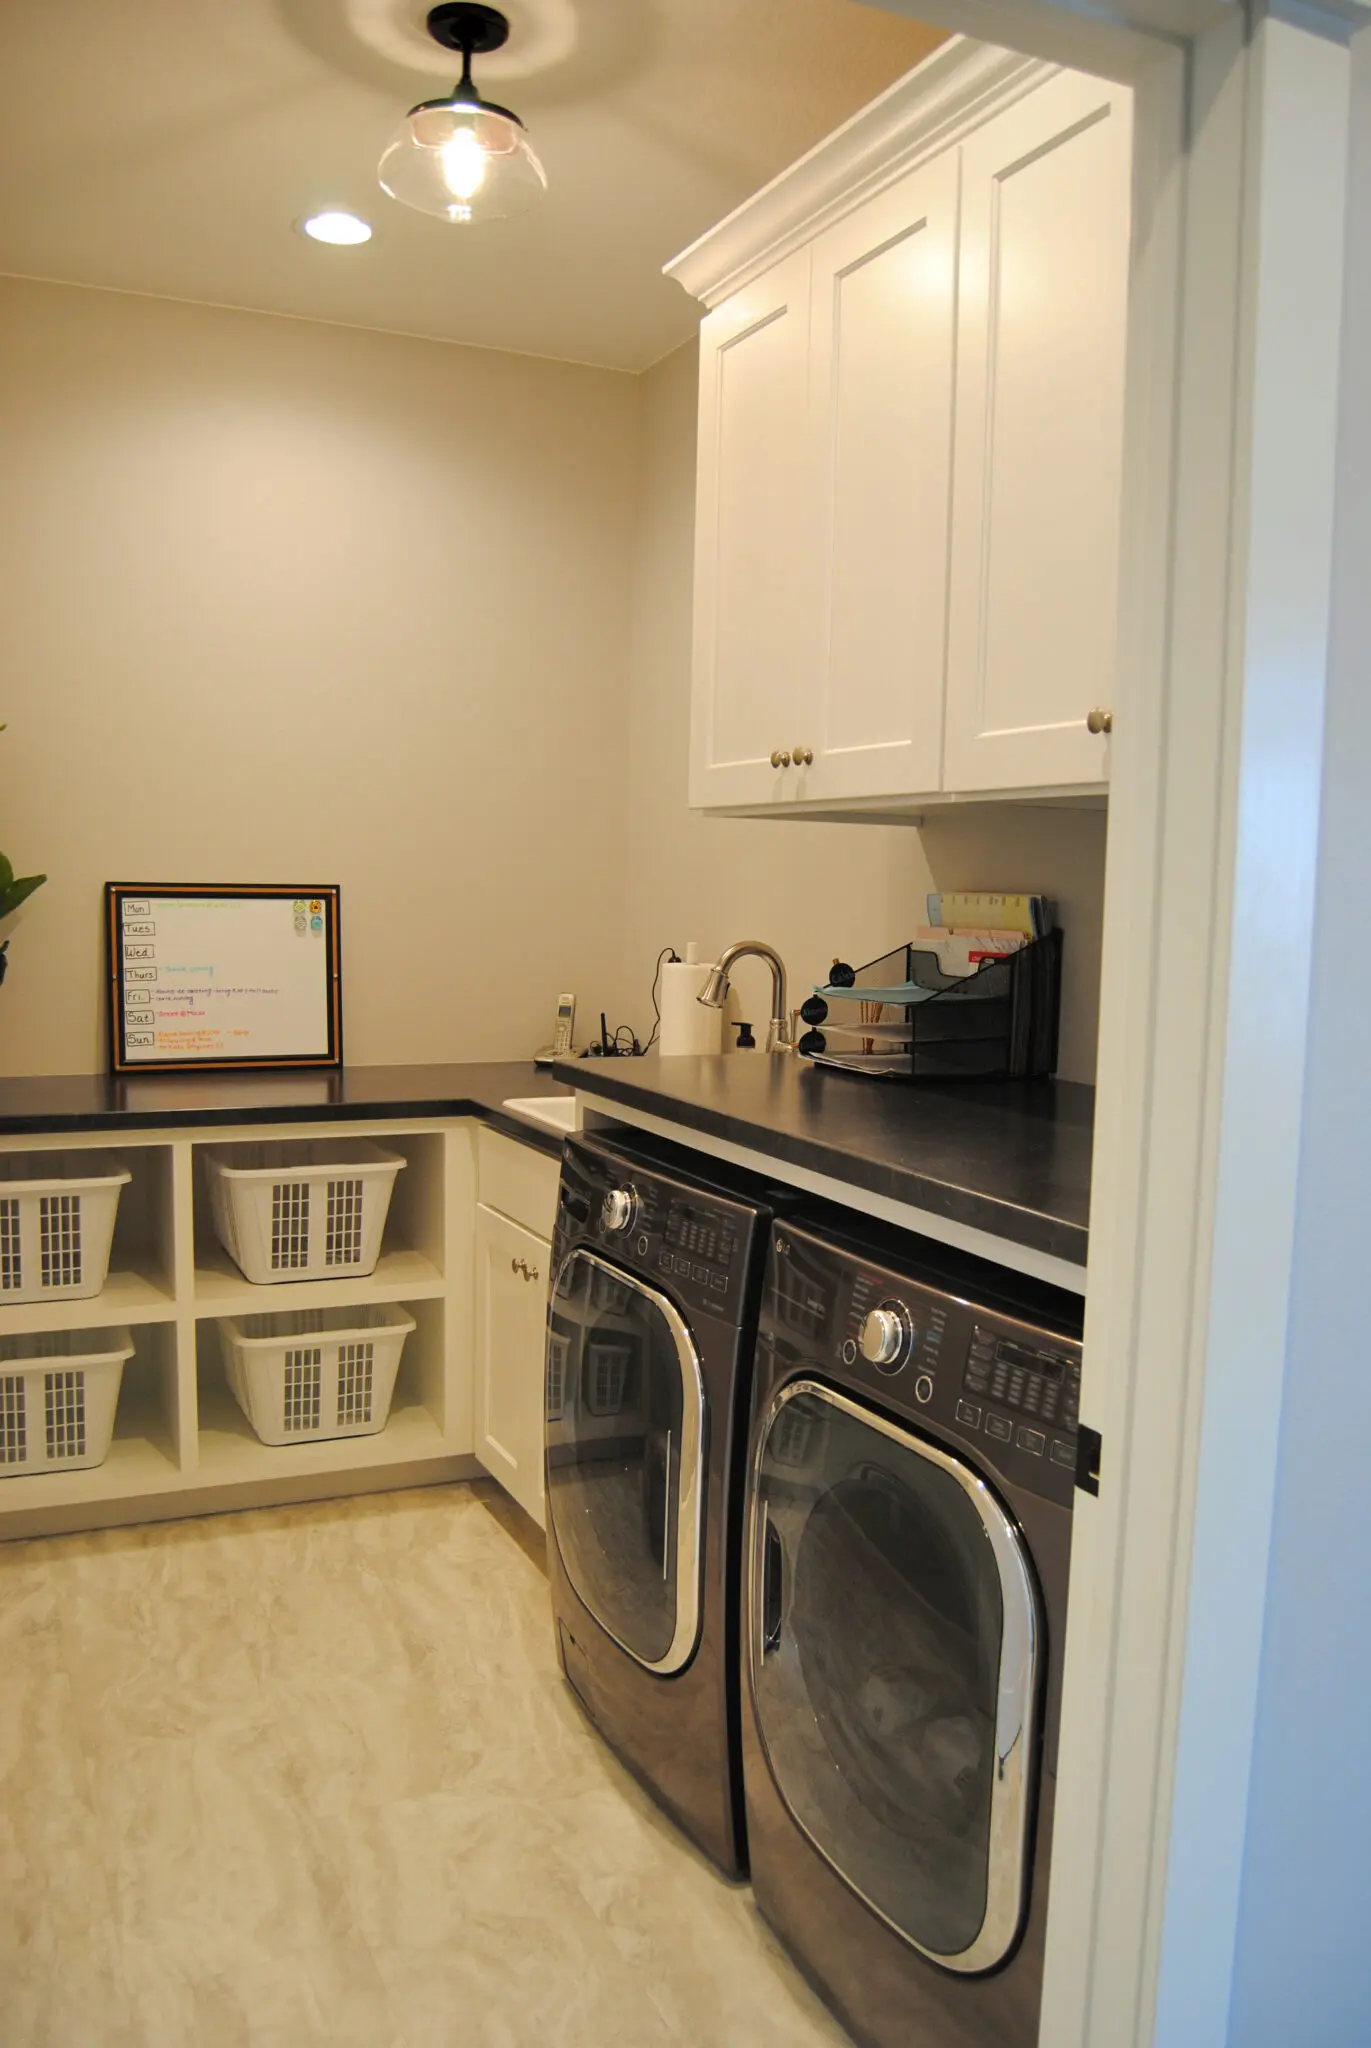 Utility room with washer, laundry vanities and closet space